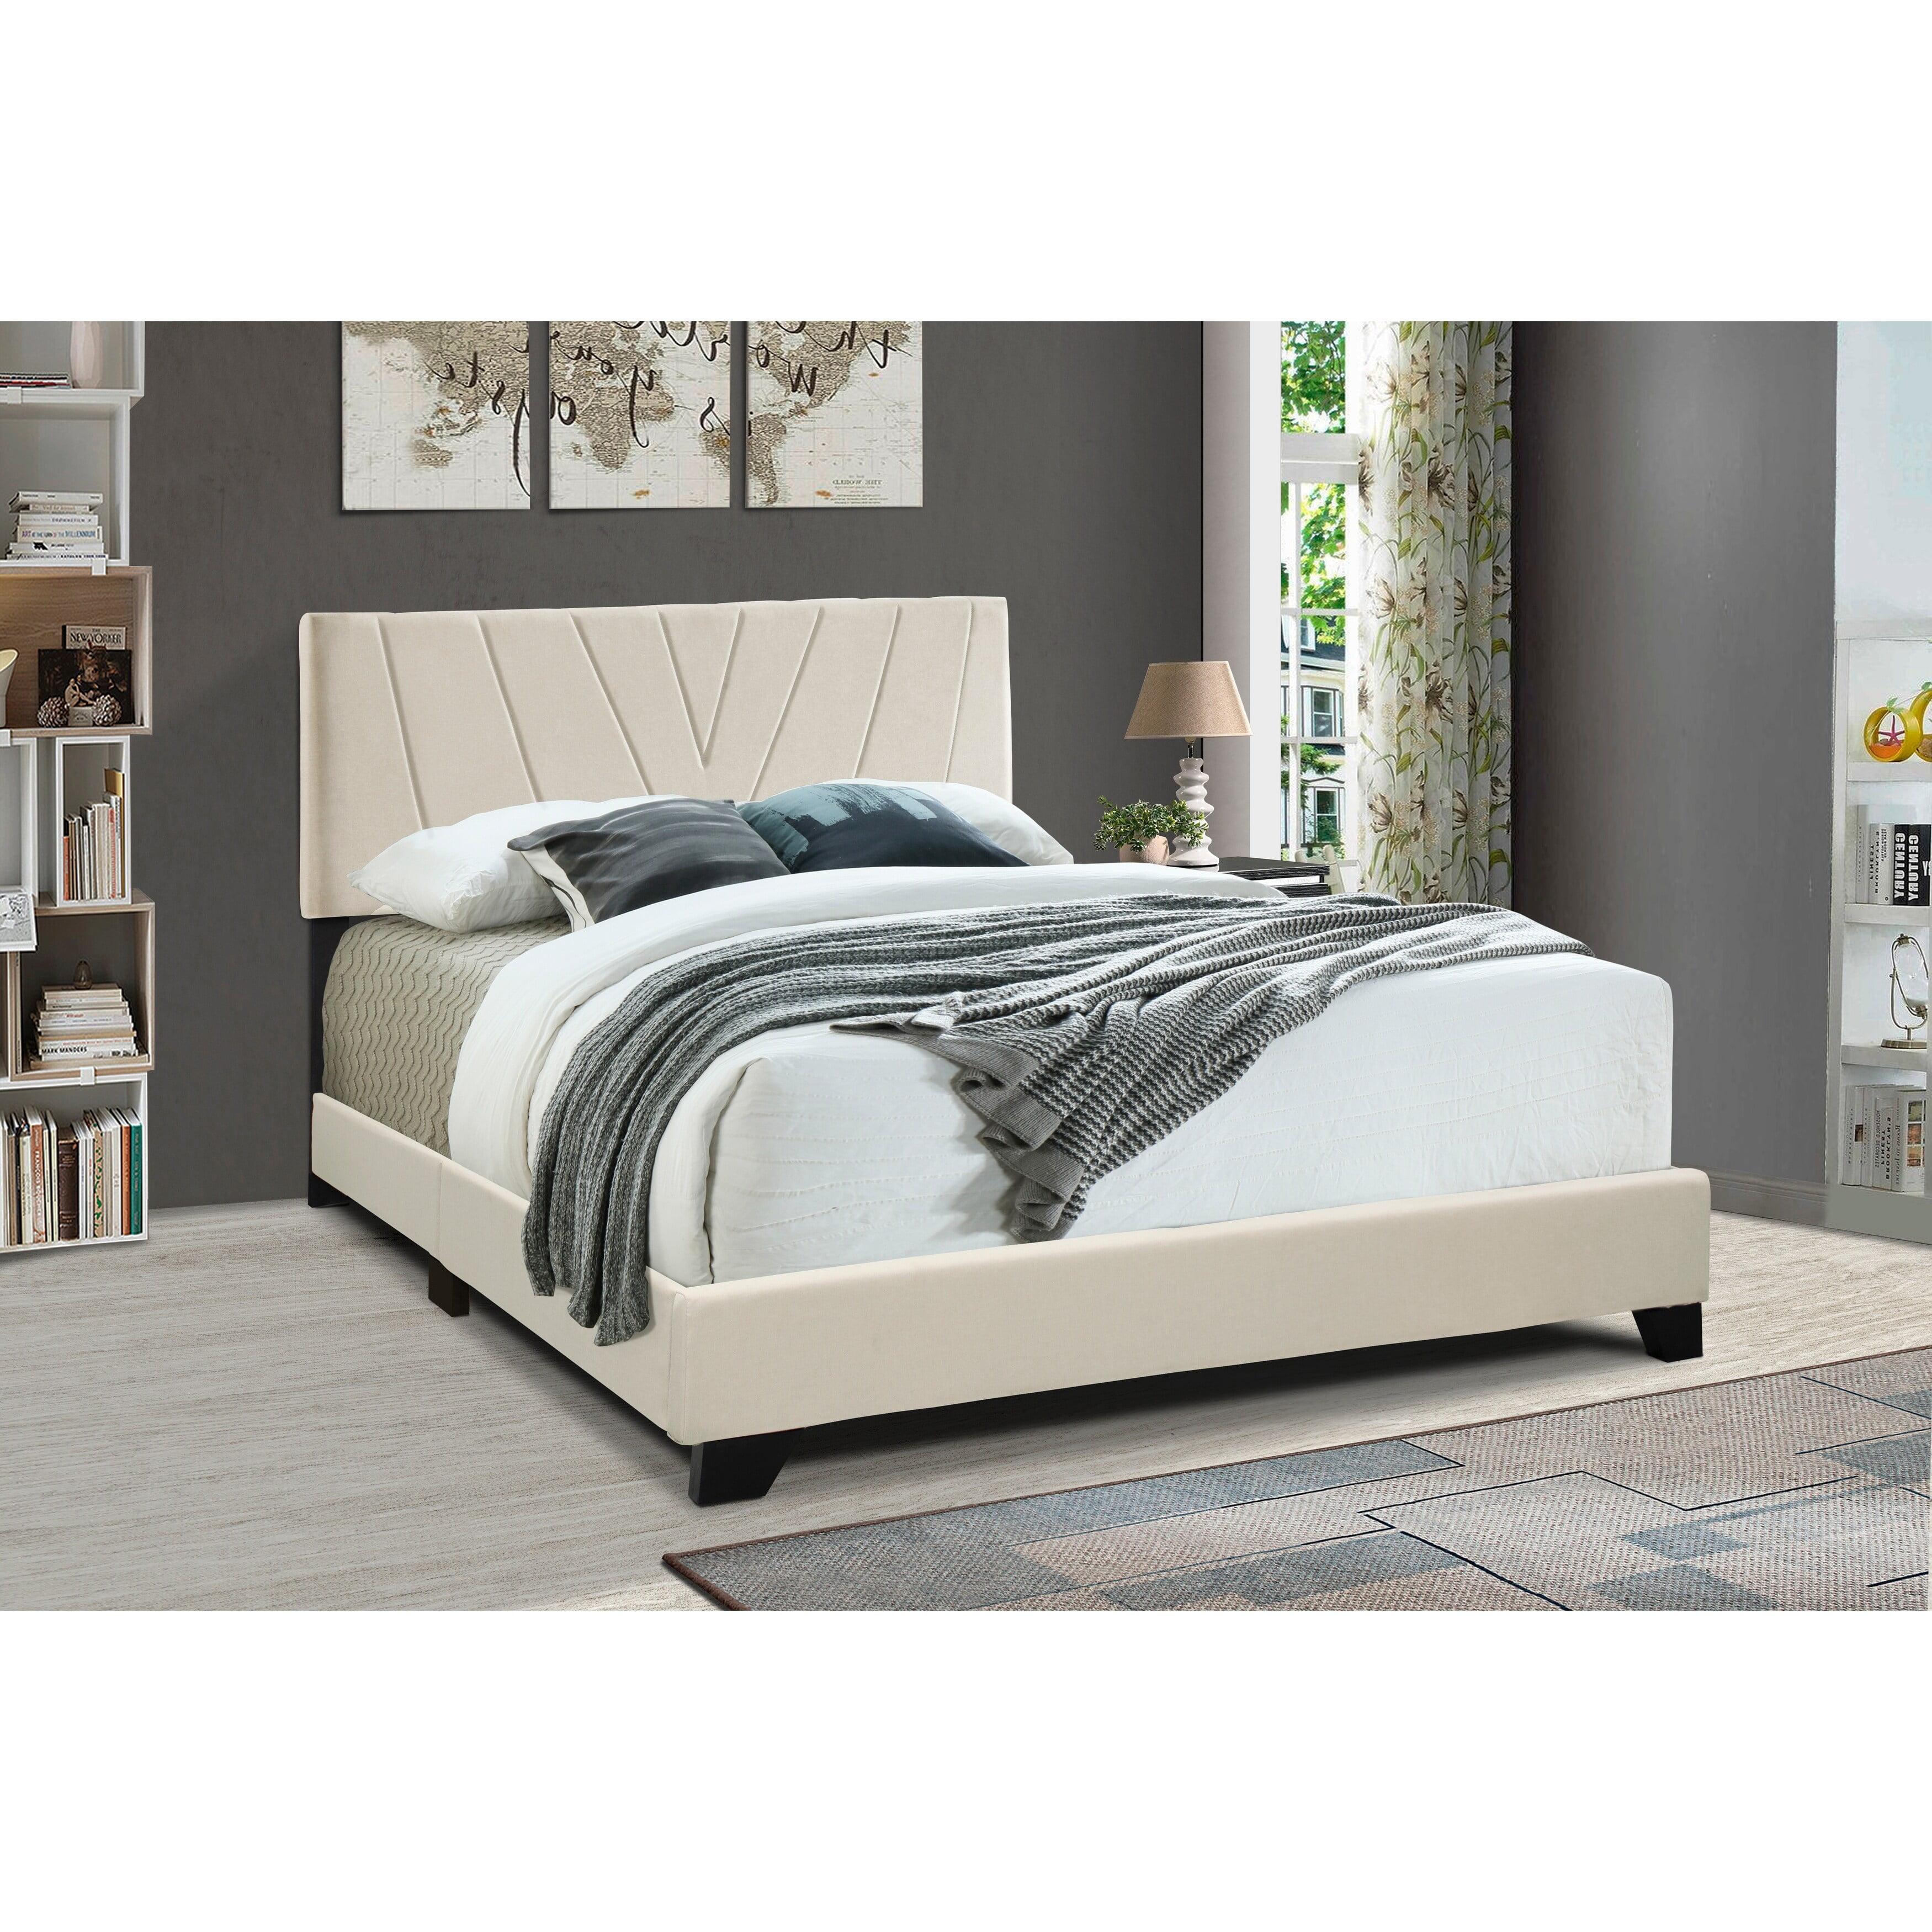 Cannoli Cream Velvet Upholstered Queen Bed with Contemporary Design